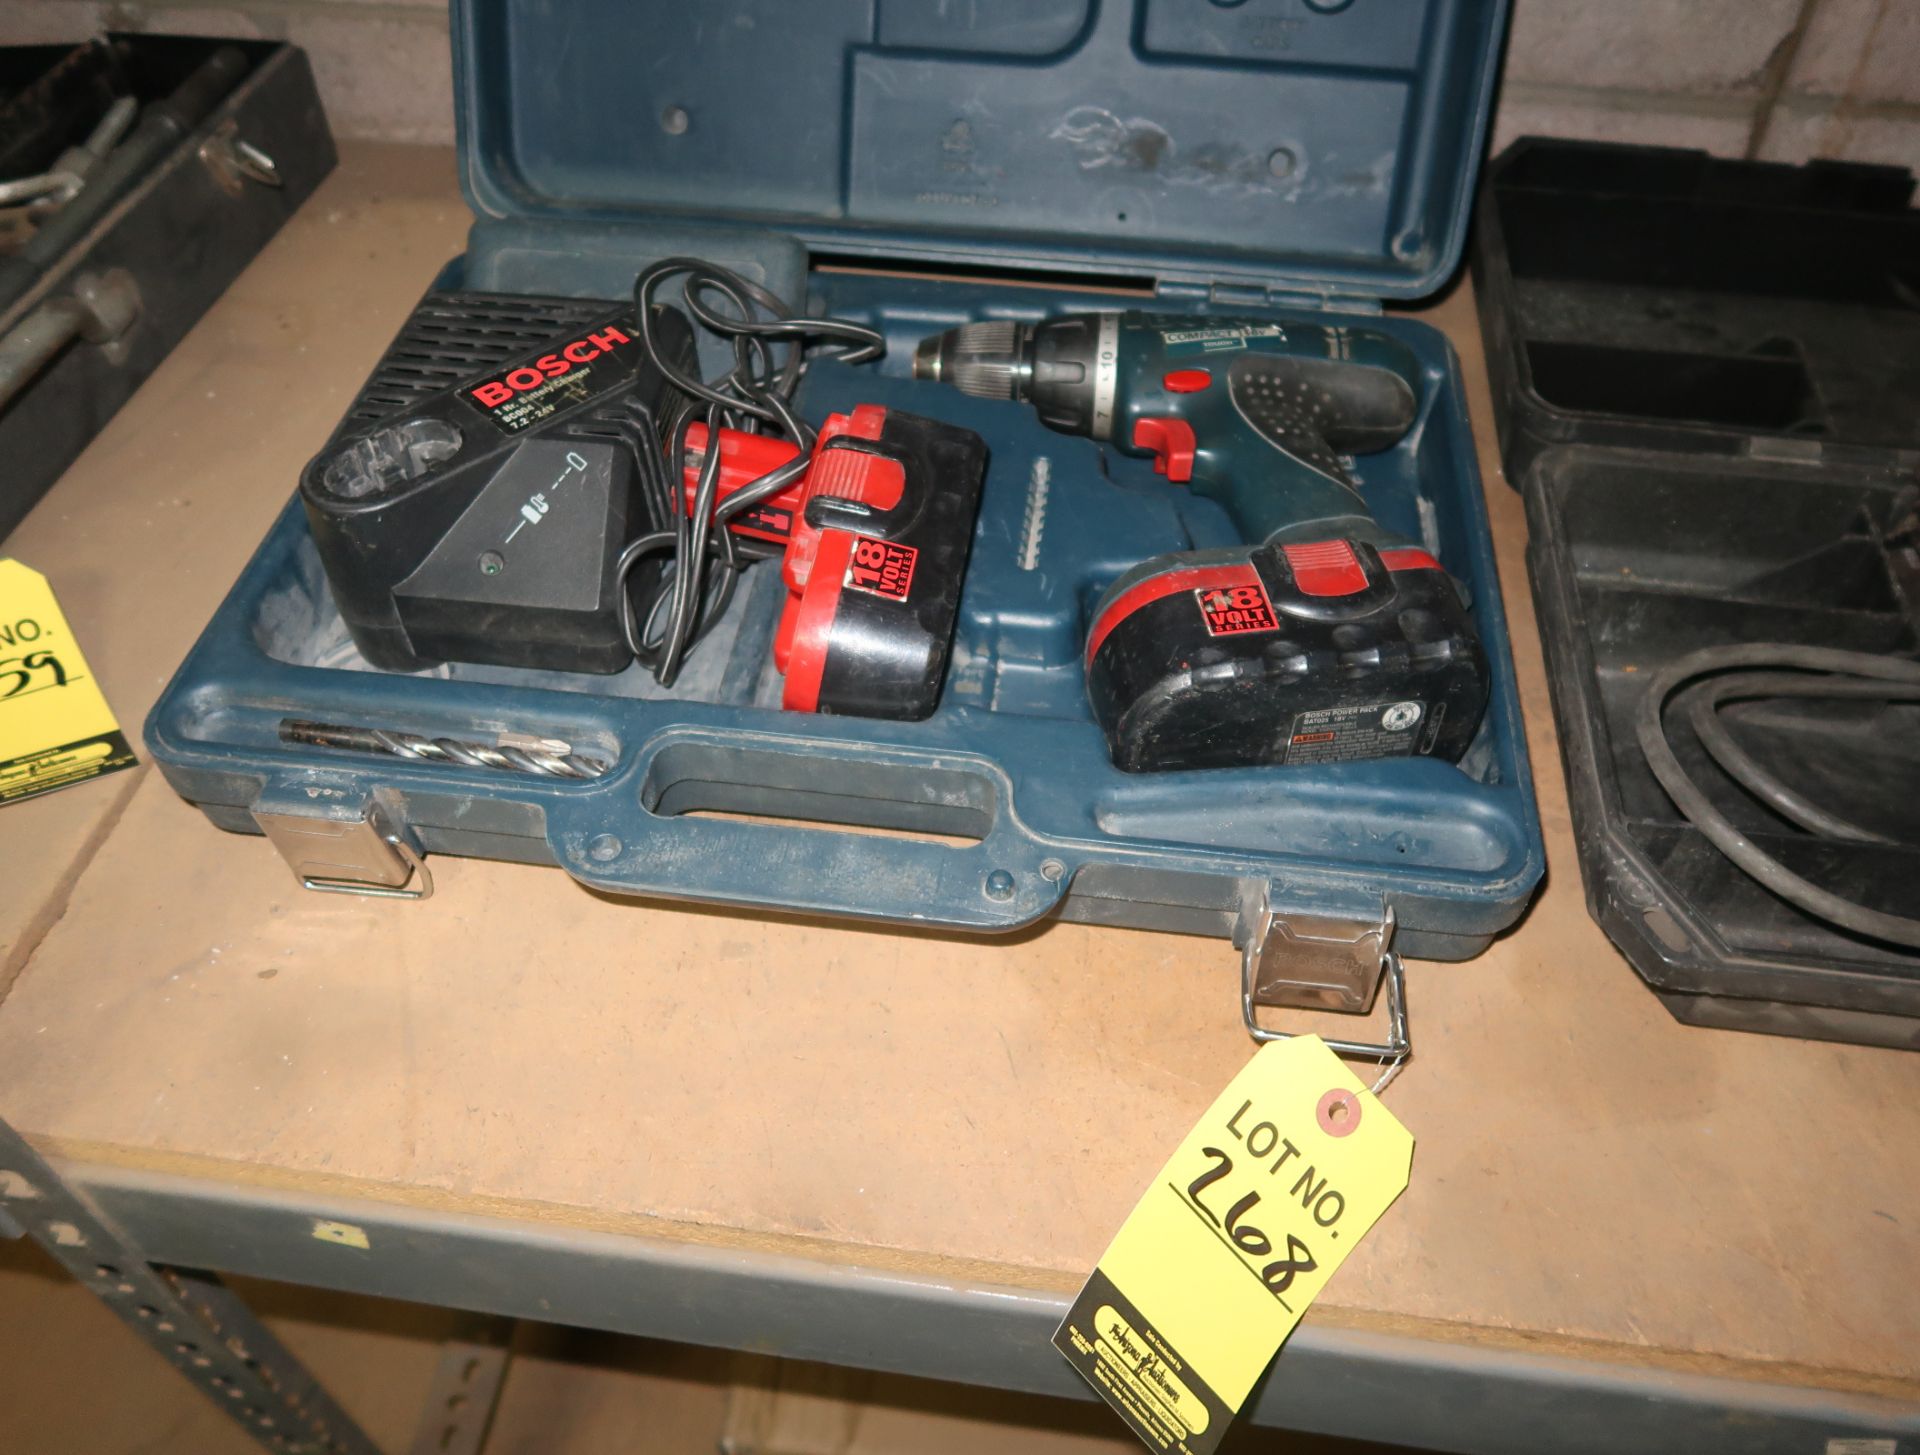 BOSCH CORDLESS DRILL W/ 2 BATTERIES & CHARGER